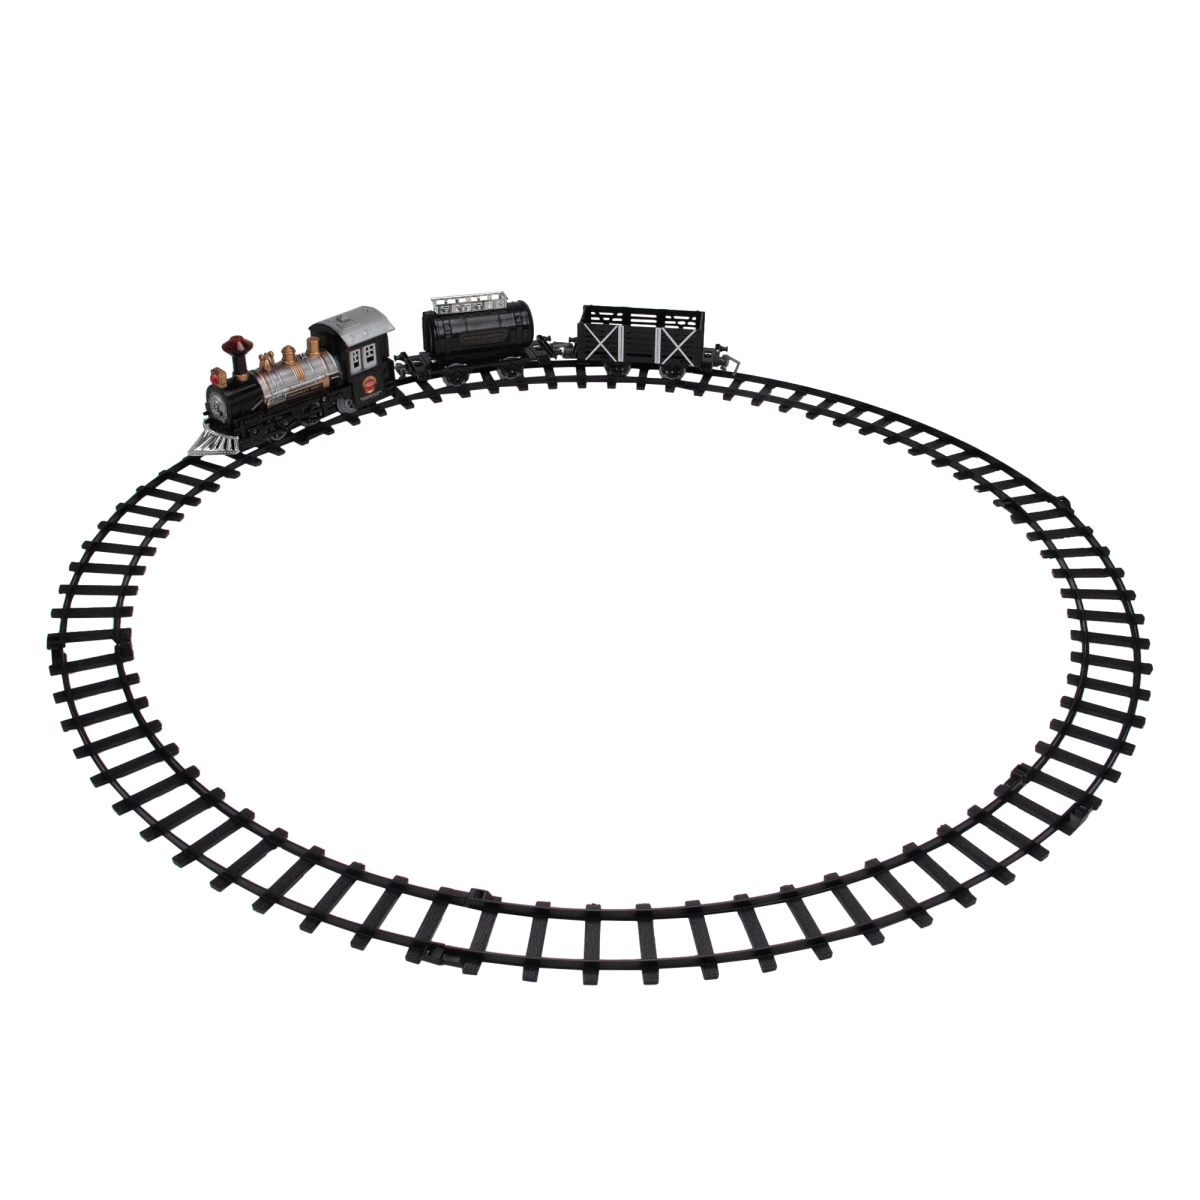 Picture of Northlight 33388864 Battery Operated Black & Silver Lighted & Animated Classic Train Set with Sound - 9 Piece